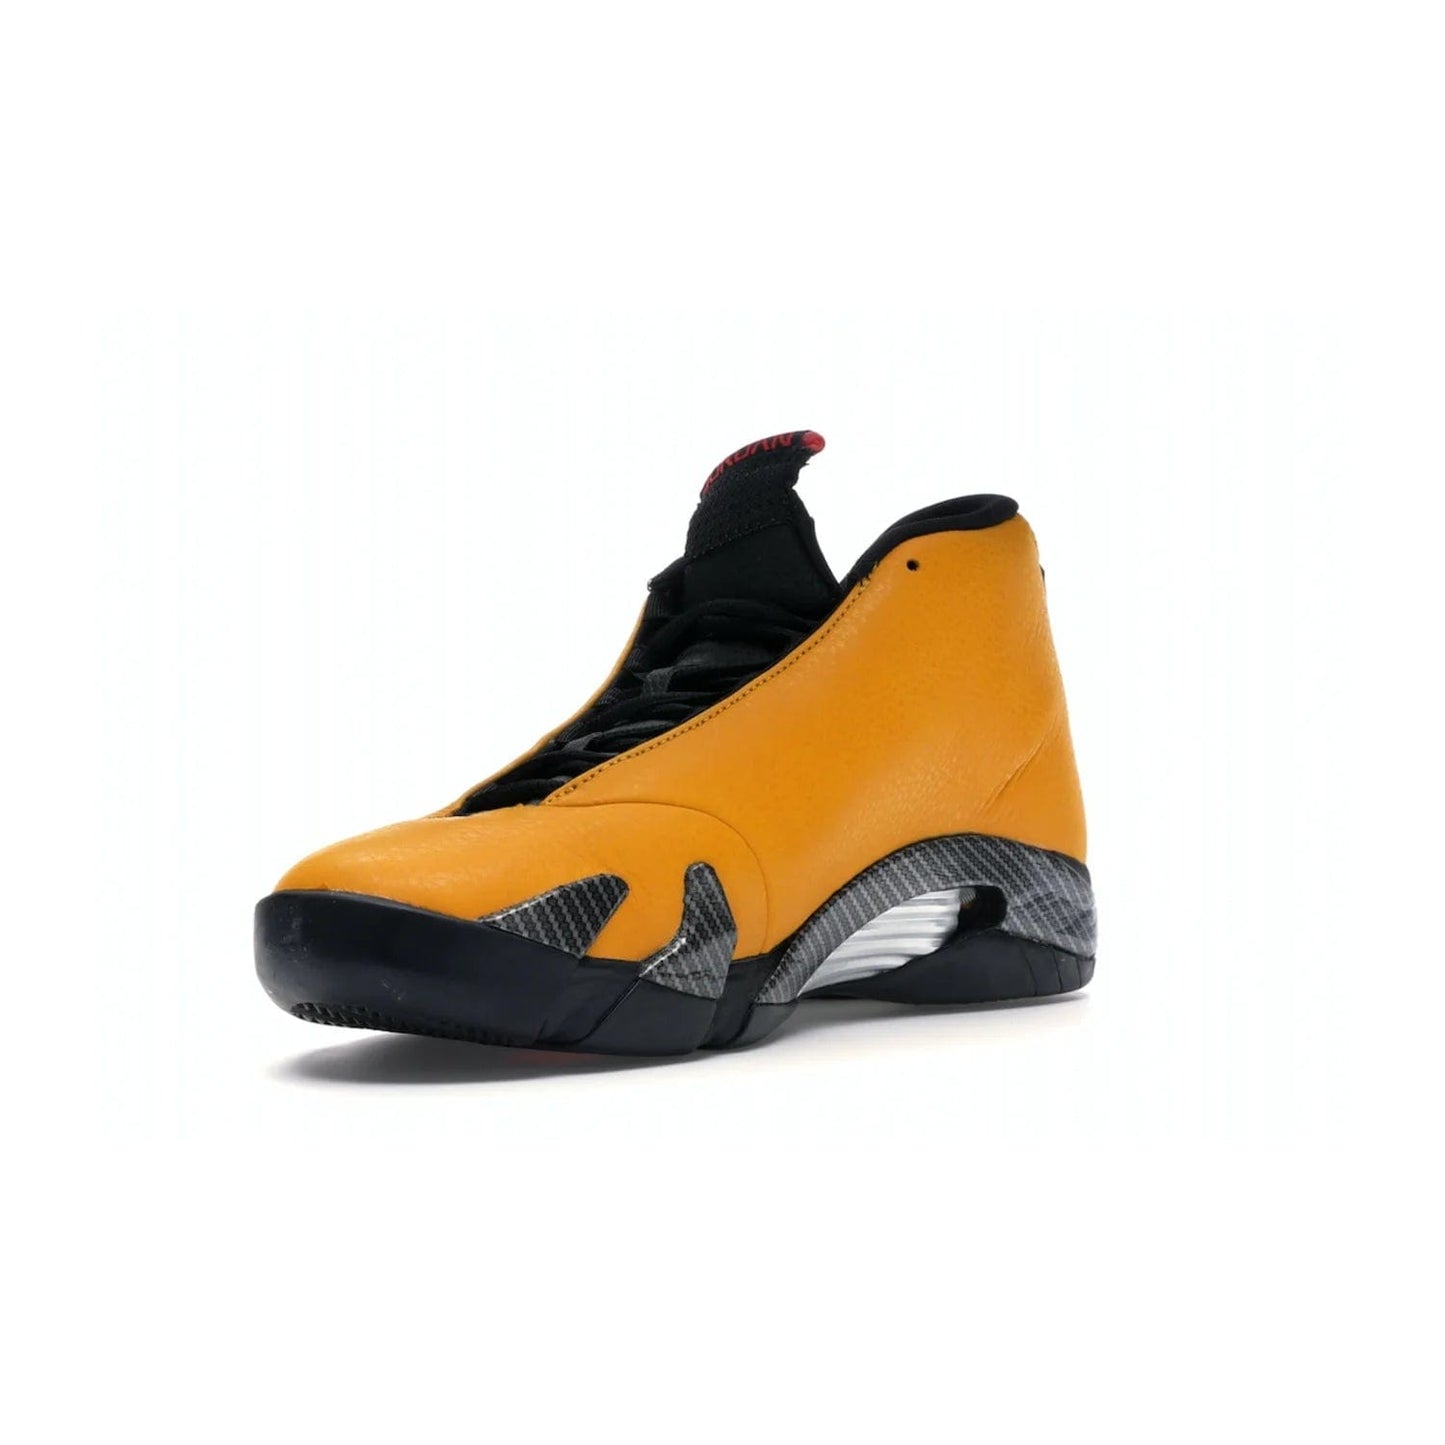 Jordan 14 Retro University Gold - Image 14 - Only at www.BallersClubKickz.com - Air Jordan 14 Retro University Gold: High-quality leather sneaker with Jumpman, tongue & heel logos. Zoom Air units & herringbone traction for superior comfort. University Gold outsole for stylish streetwear.